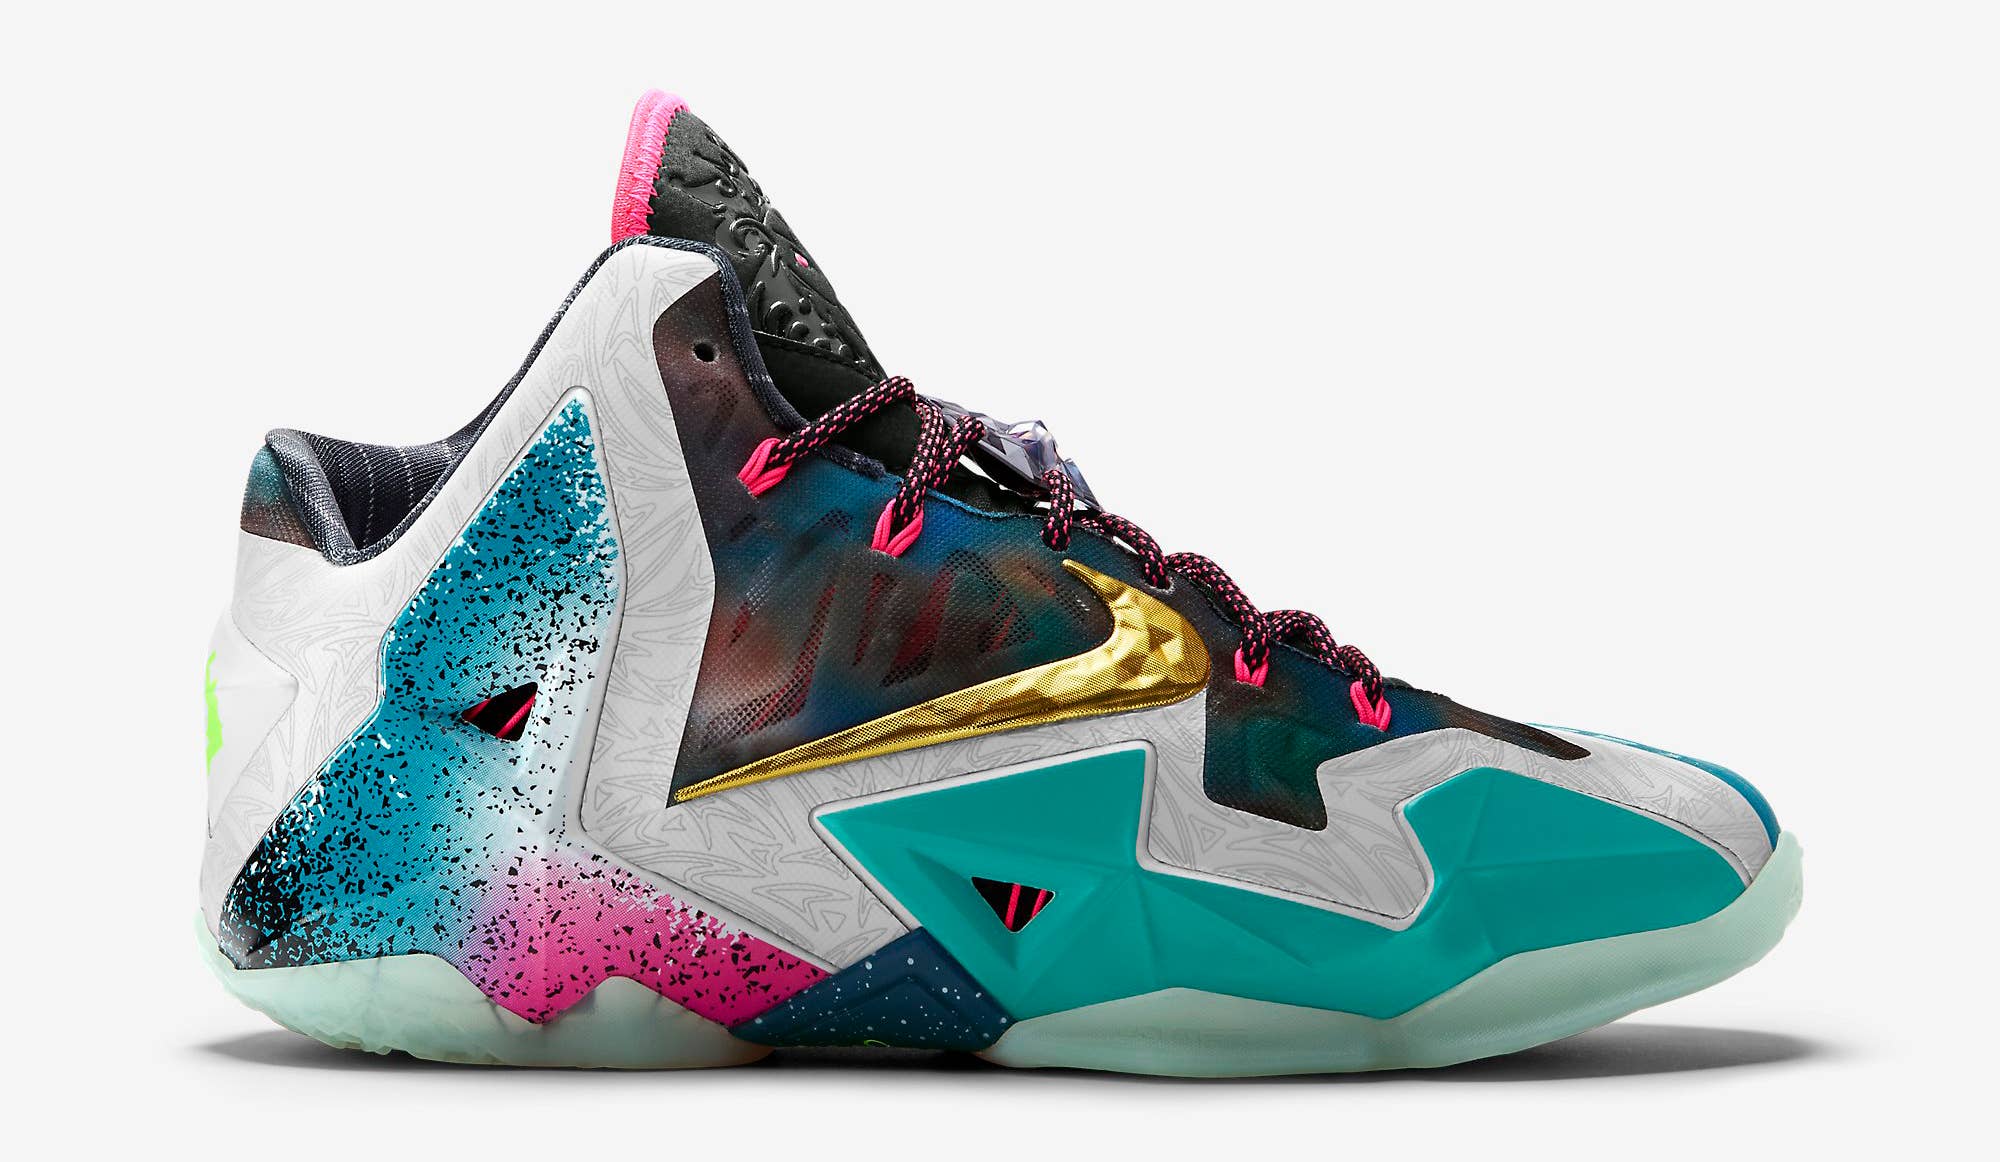 What the LeBron 11